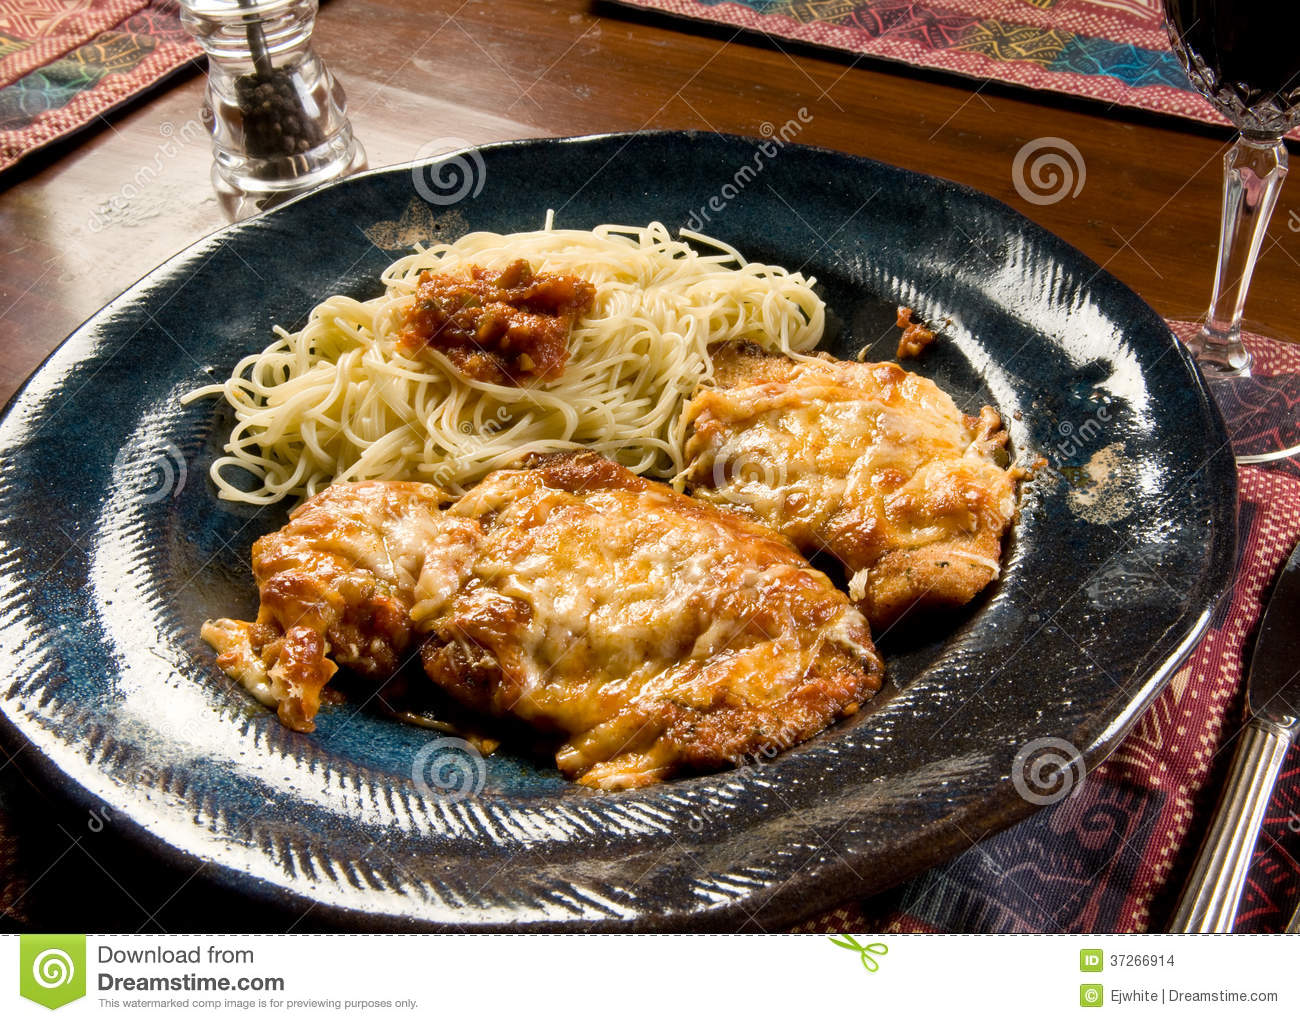 Serving Of Chicken Parmigiana  Chicken Parmesan  With Angle Hair Pasta